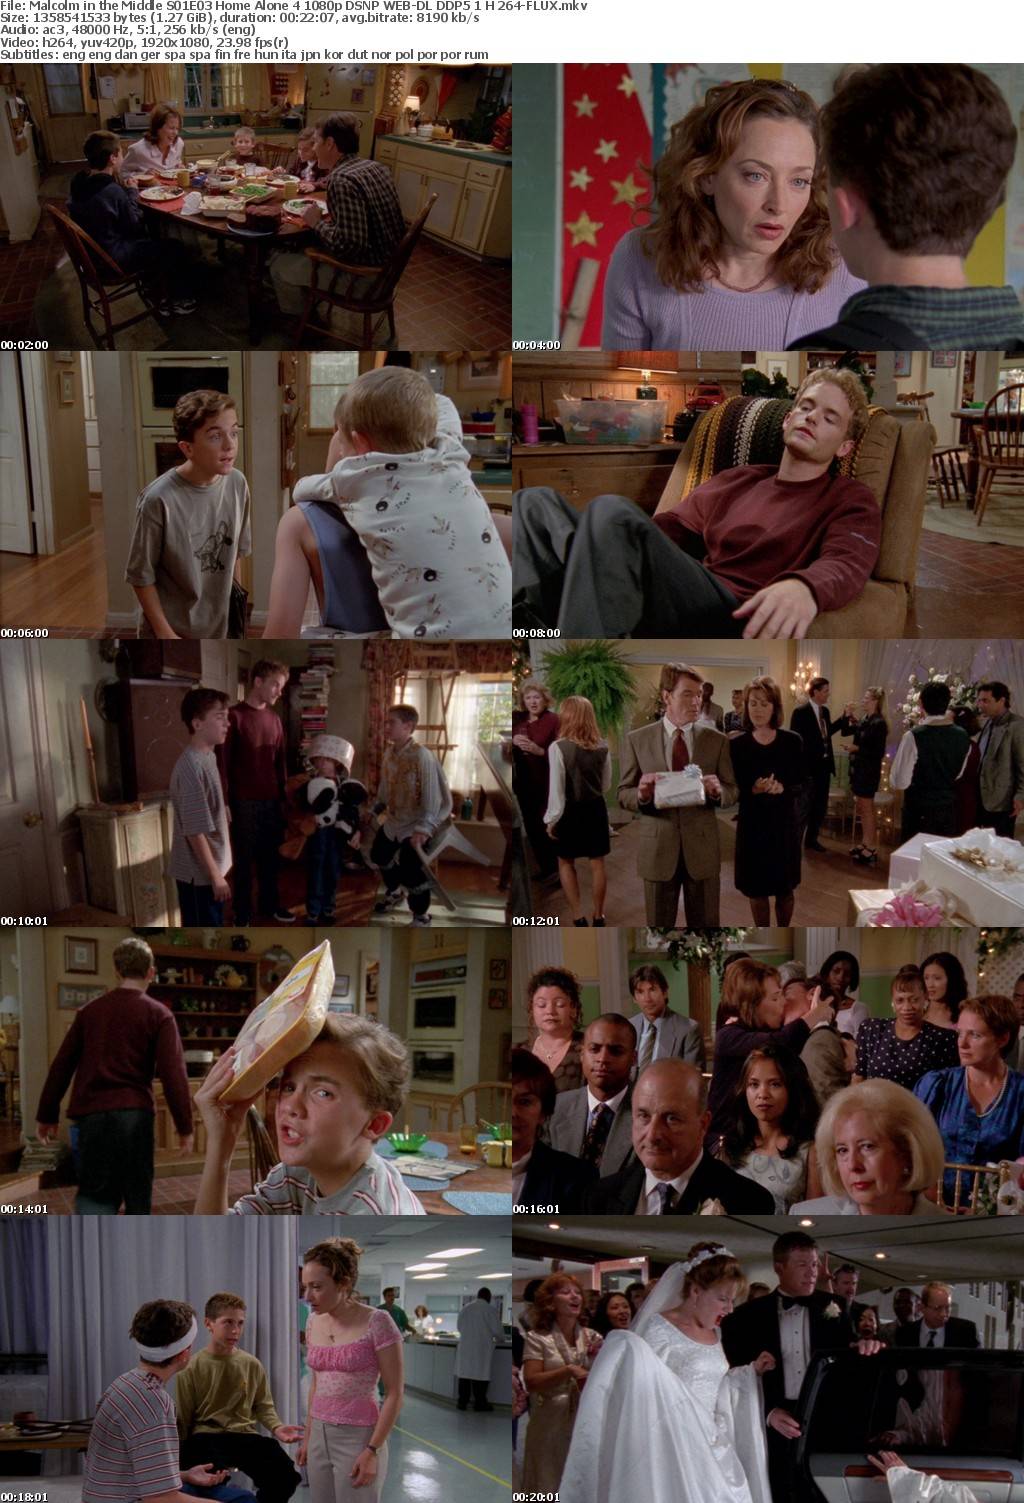 Malcolm in the Middle S01E03 Home Alone 4 1080p DSNP WEB-DL DDP5 1 H 264-FLUX